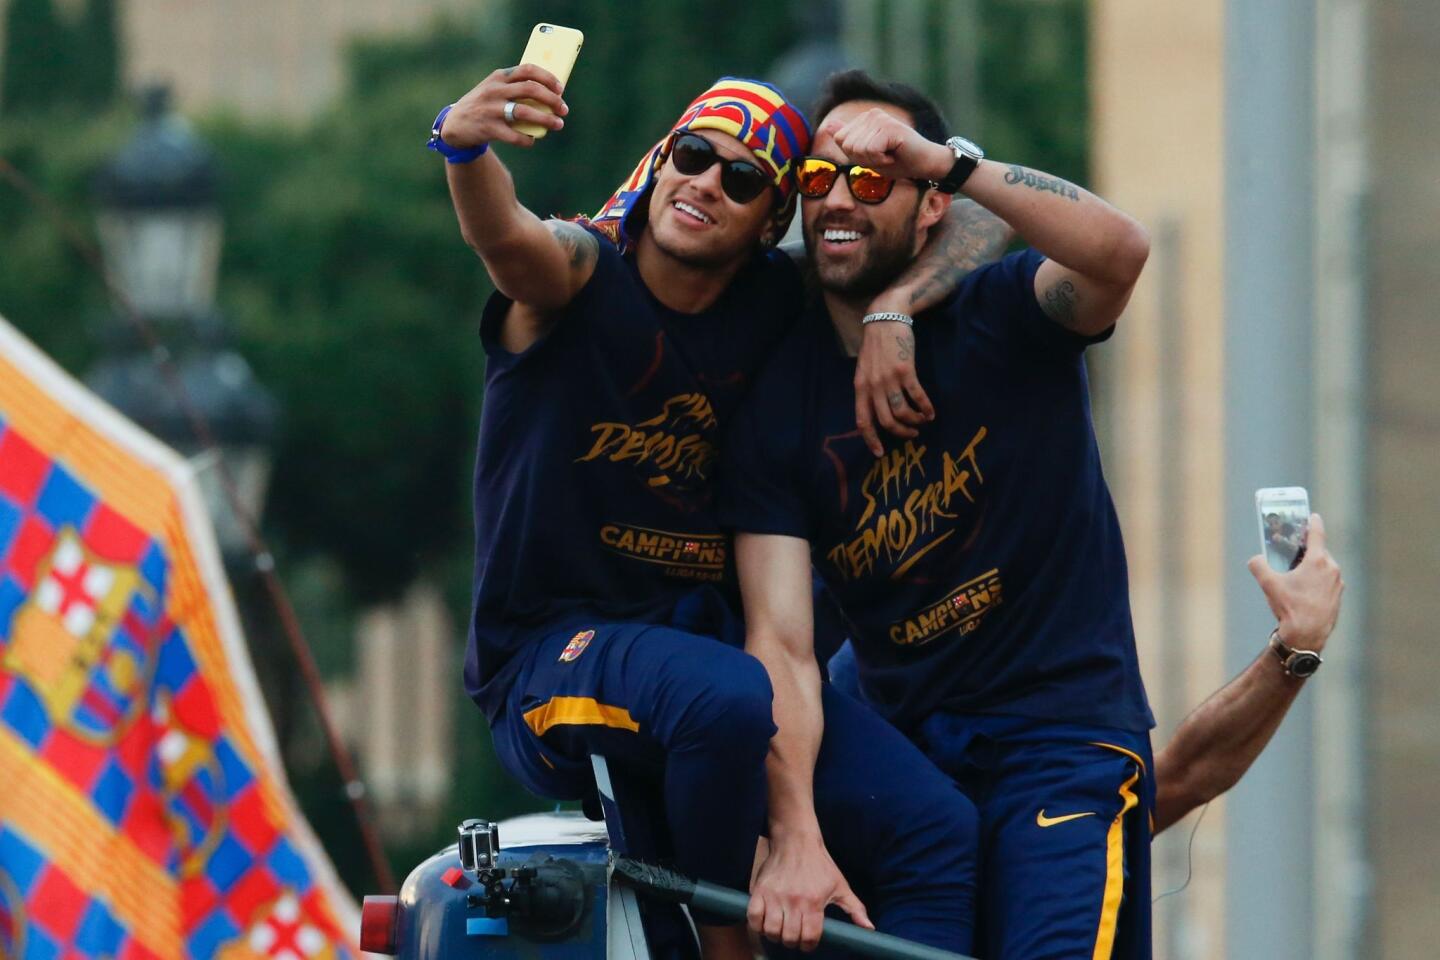 Barcelona's Brazilian forward Neymar (L) and Barcelona's Chilean goalkeeper Claudio Bravo take a selfie photo as they parade with their team on a bus through the streets of Barcelona to celebrate their 24th La Liga title, in Barcelona, on May 15, 2016 Barcelona sealed their 24th La Liga title on May 14, 2016 at Granada to hold off Real Madrid's late-season surge. / AFP PHOTO / PAU BARRENAPAU BARRENA/AFP/Getty Images ** OUTS - ELSENT, FPG, CM - OUTS * NM, PH, VA if sourced by CT, LA or MoD **